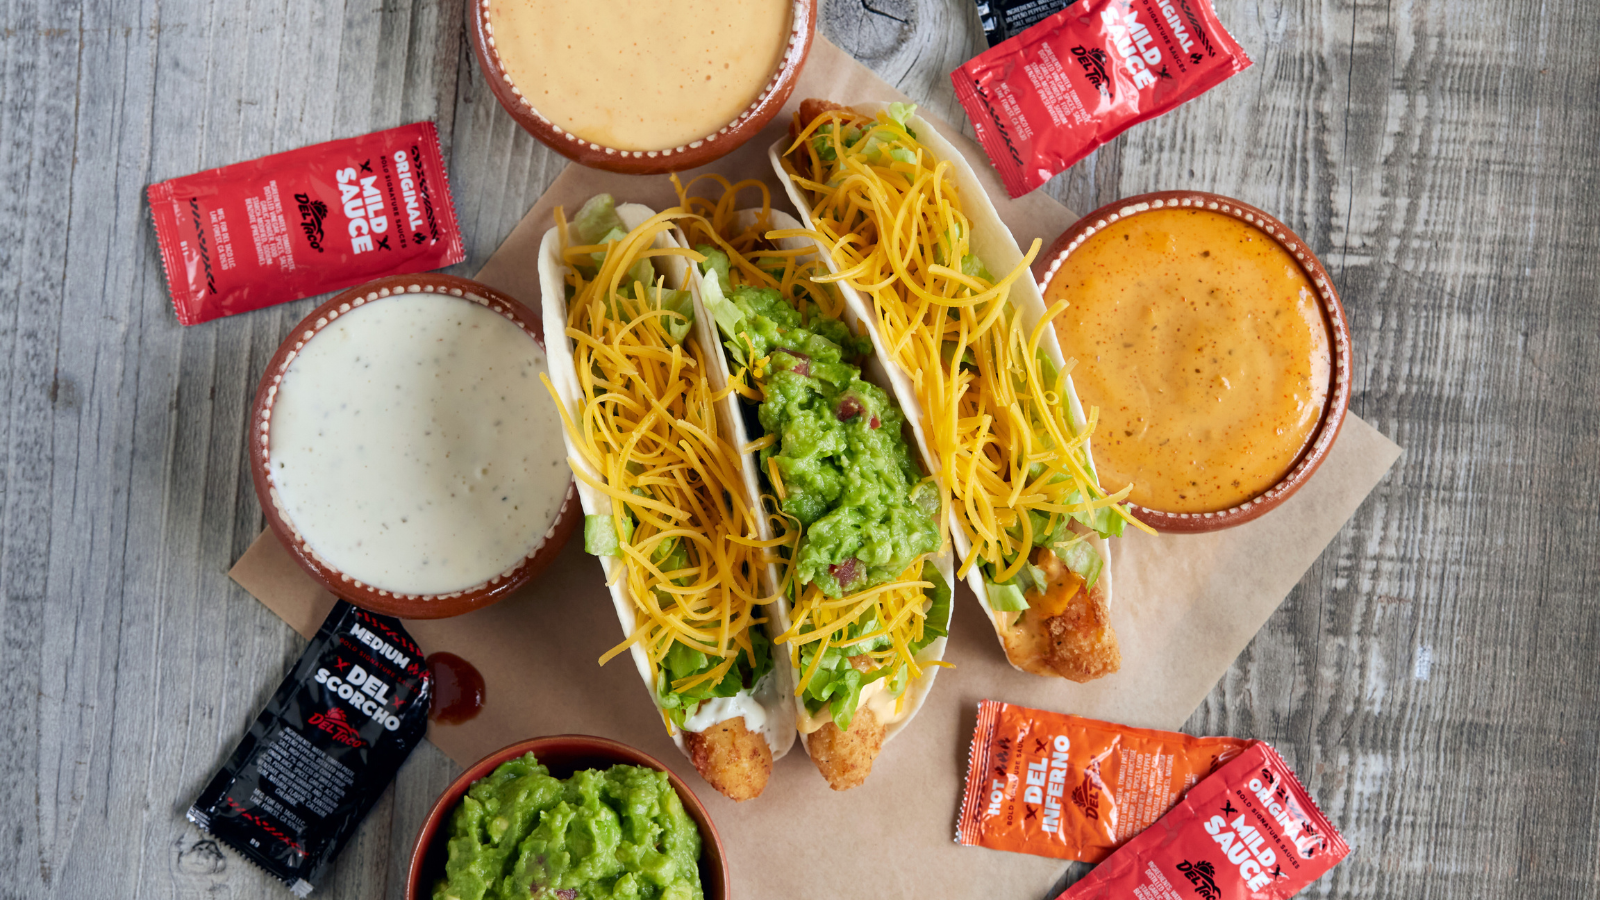 Best Taco Franchises in the USA